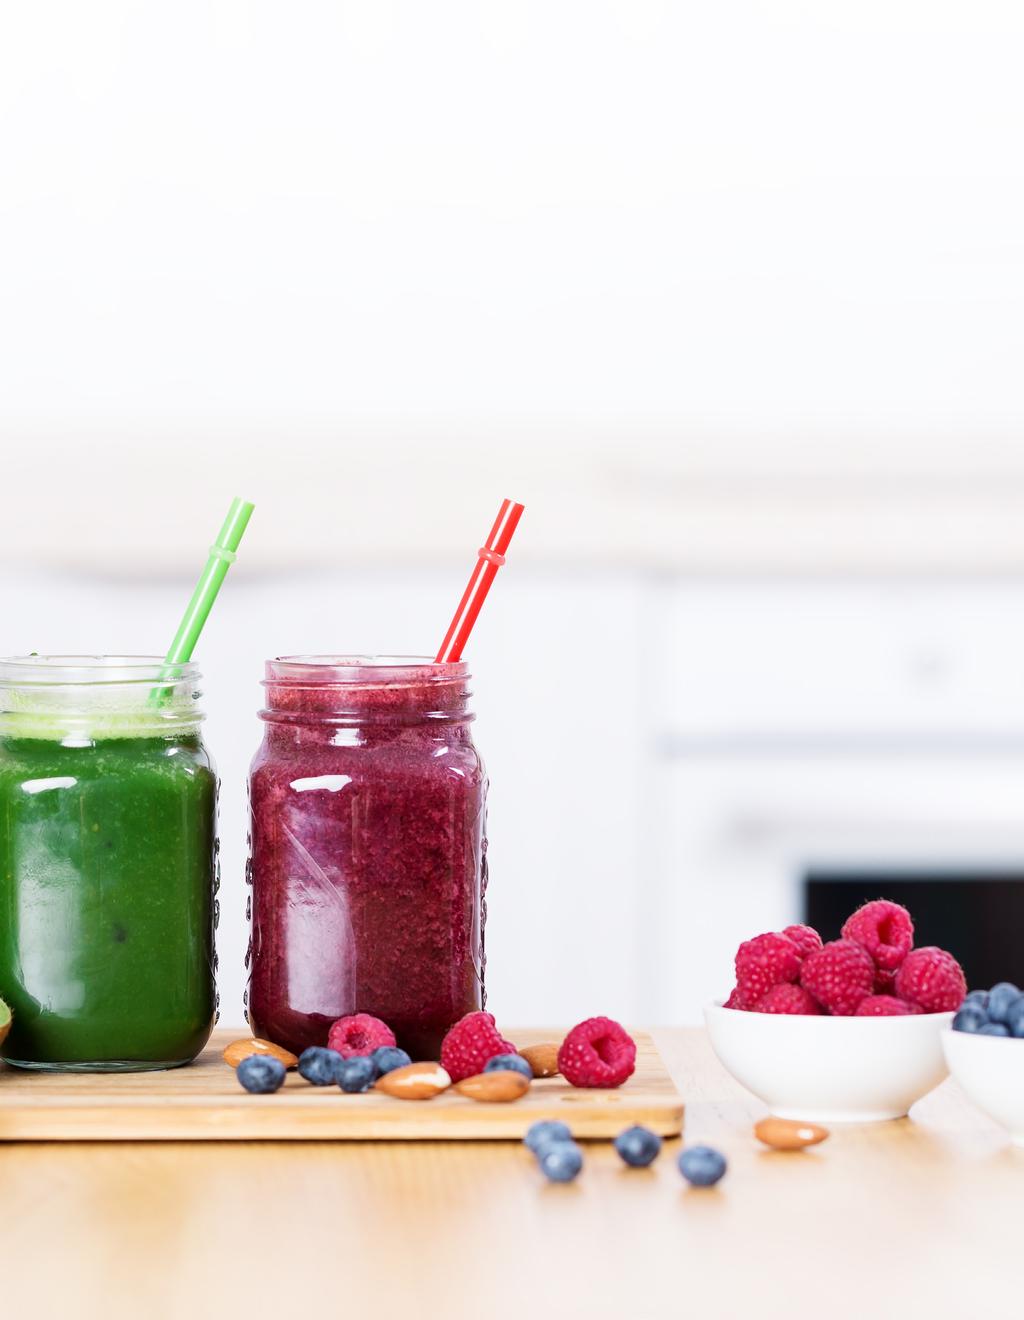 Smoothies are easy, so you will turn to them. Smoothies are a great way to get in your daily greens. START EACH DAY WITH A LARGE GREEN SMOOTHIE.